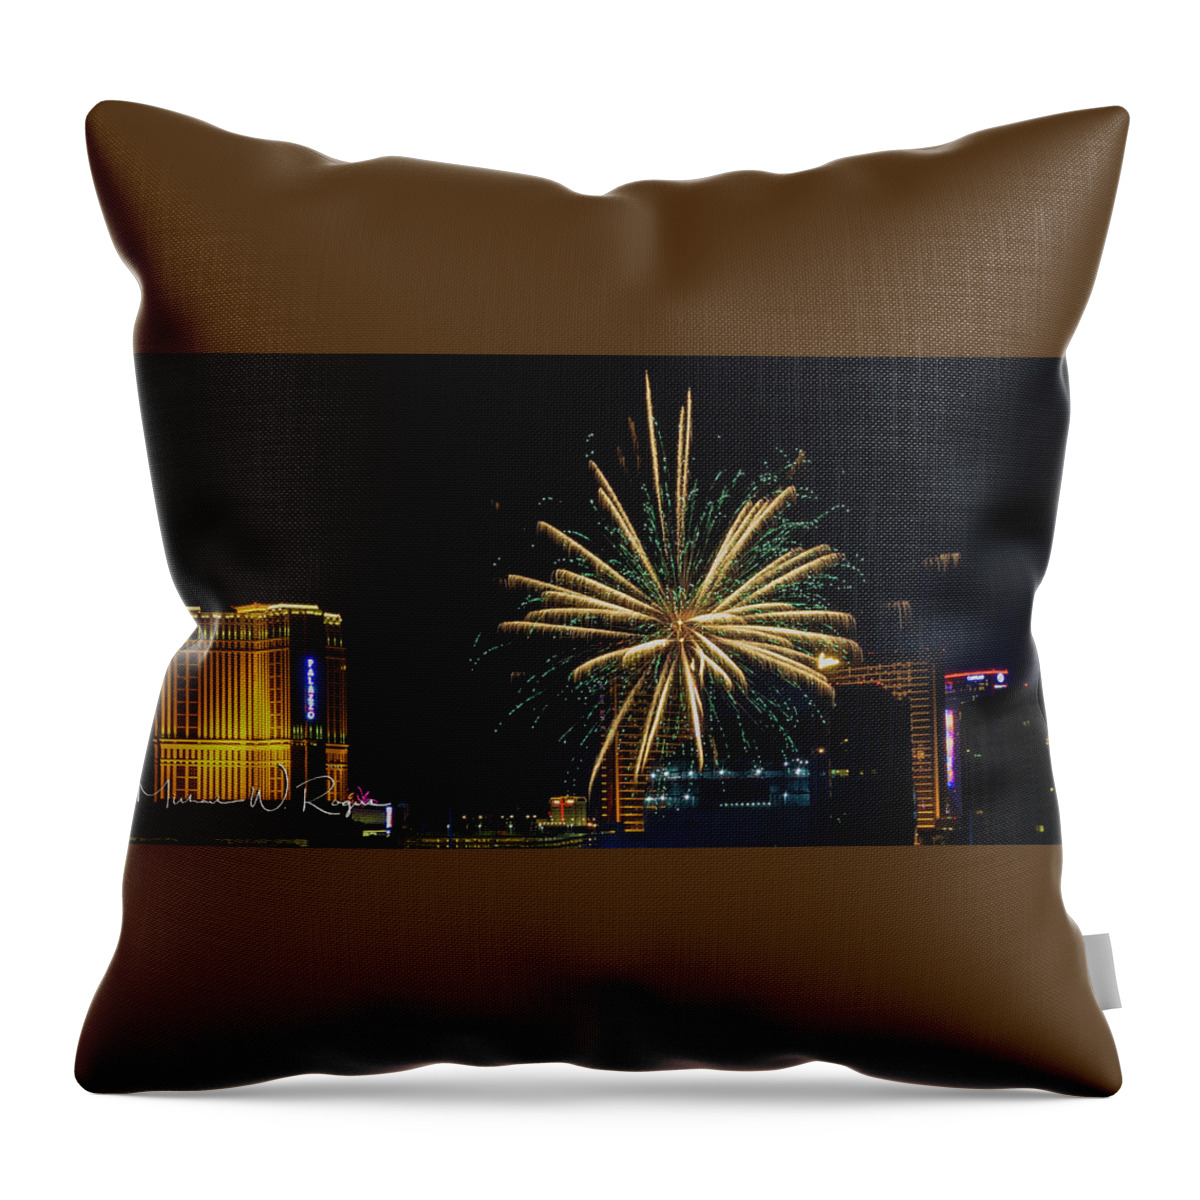  Throw Pillow featuring the photograph Palm Tree Fireworks Las Vegas by Michael W Rogers